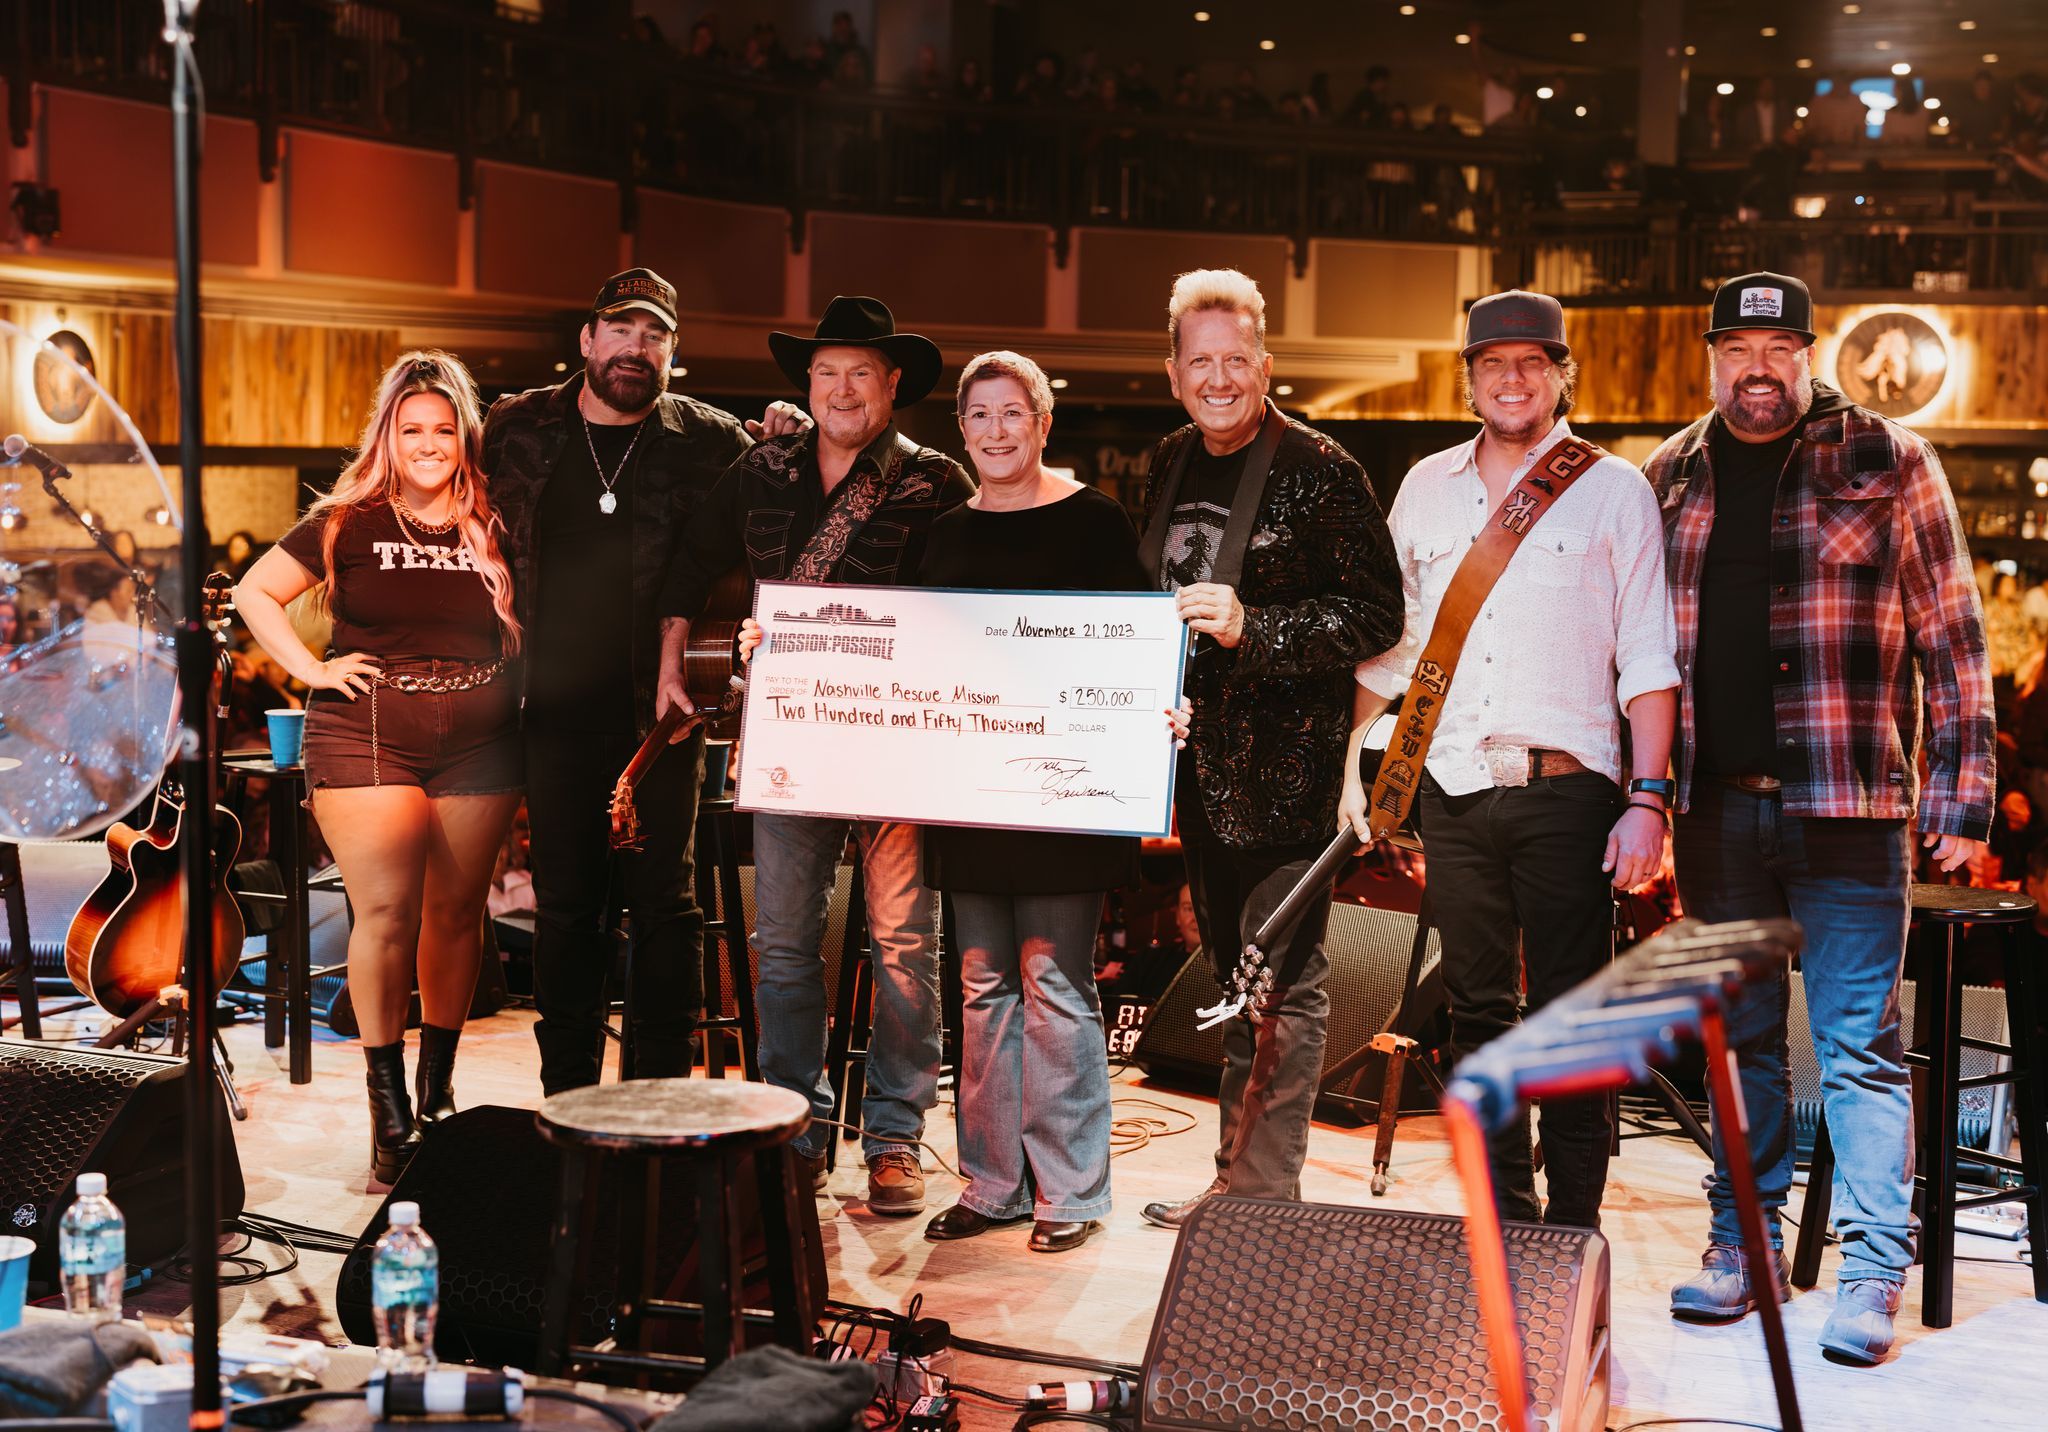 TRACY LAWRENCE DONATES OVER $250K AT 18TH ANNUAL MISSION:POSSIBLE TURKEY FRY AND BENEFIT CONCERT WITH LEE BRICE, PRISCILLA BLOCK AND HALFWAY TO HAZARD